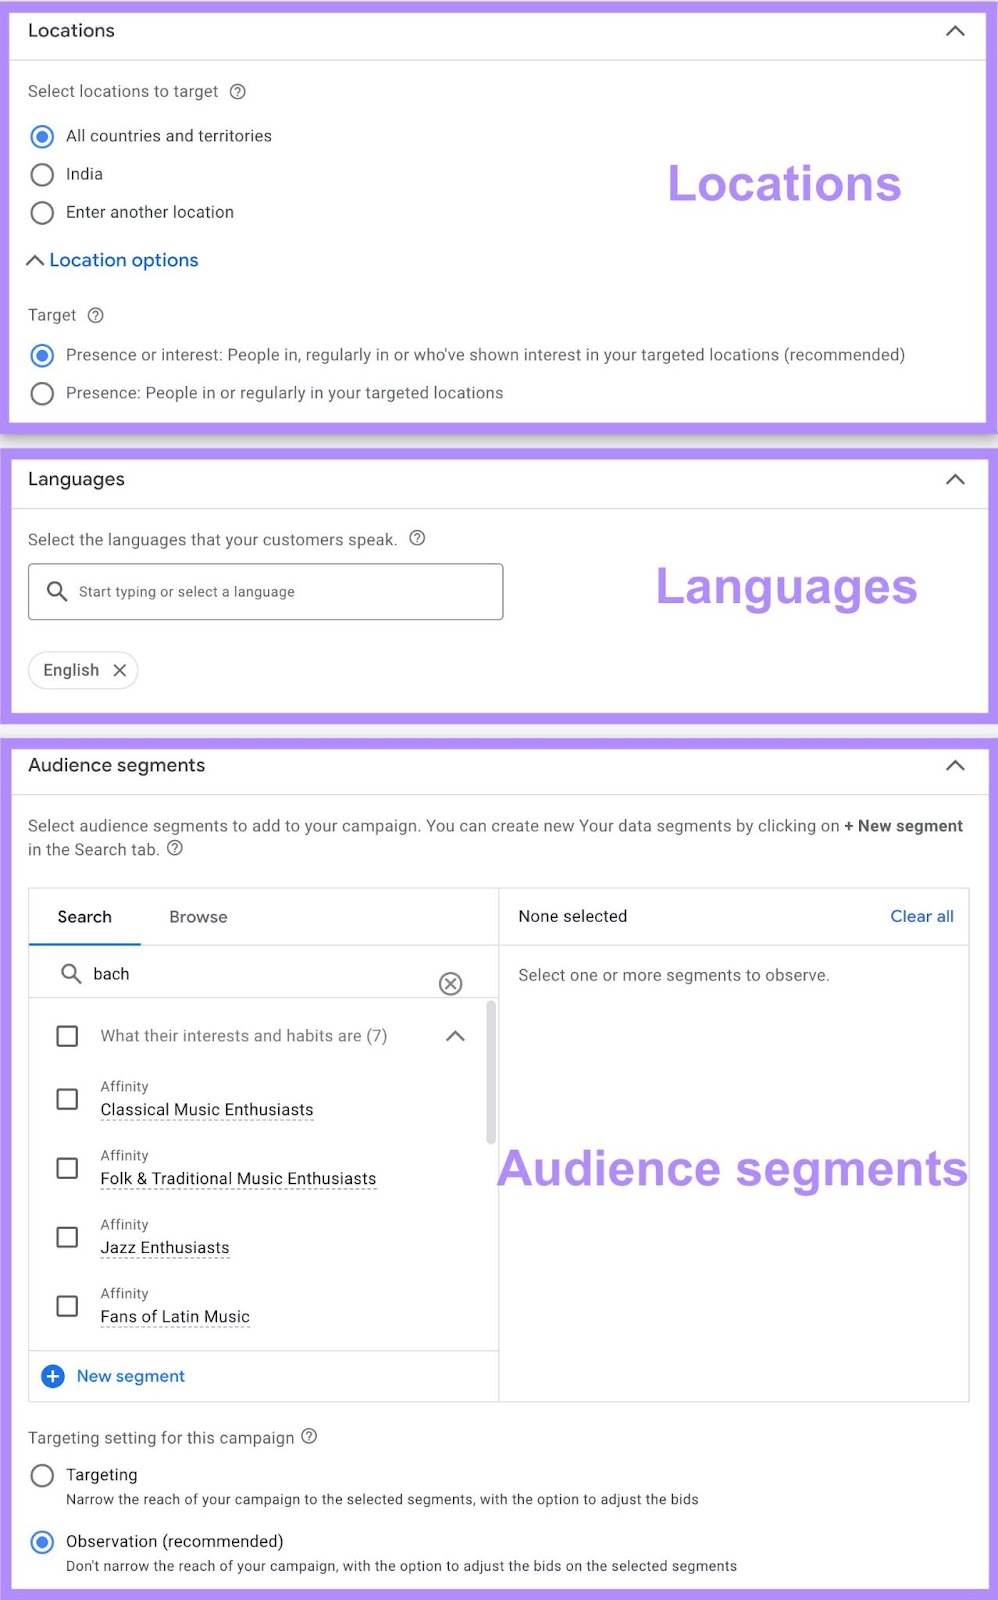 Location, languages and audience segments campaign settings in Google Ads